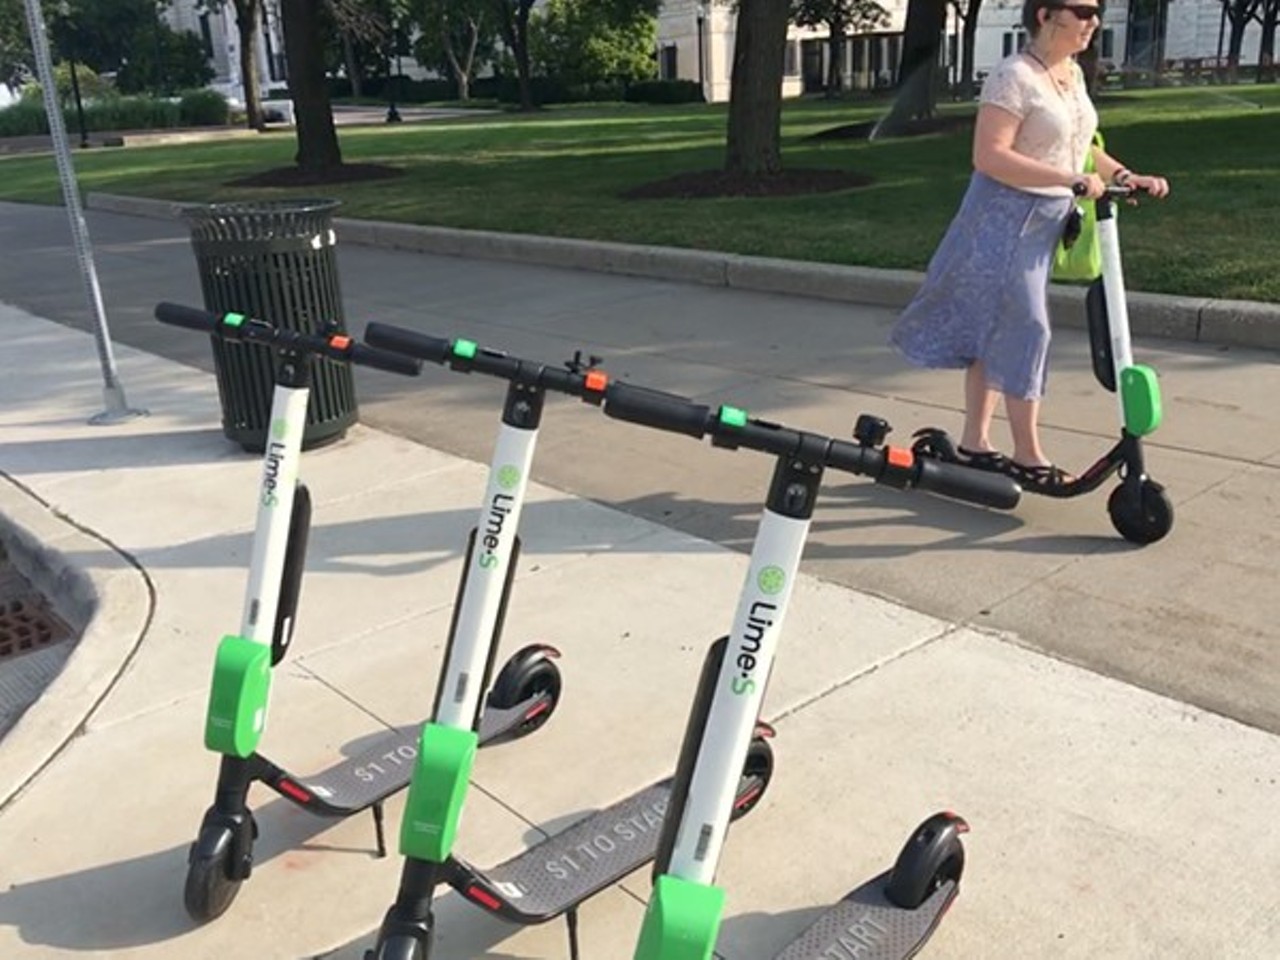 Everyone being irrationally mad at scooters (and lowkey riding them) 
When e-scooters first appeared on Detroit&#146;s landscape in the summer of 2018, people lost their dang minds. While some view them as a convenient way to zip around town, others curse their very existence and relish every time one is found disabled, discarded, or destroyed on the side of the road. We miss the near collisions and tired complaints just as much as we miss trying to fit two people on one scooter, because life before corona was about having no rules. We miss that. 
Photo by Lee DeVito